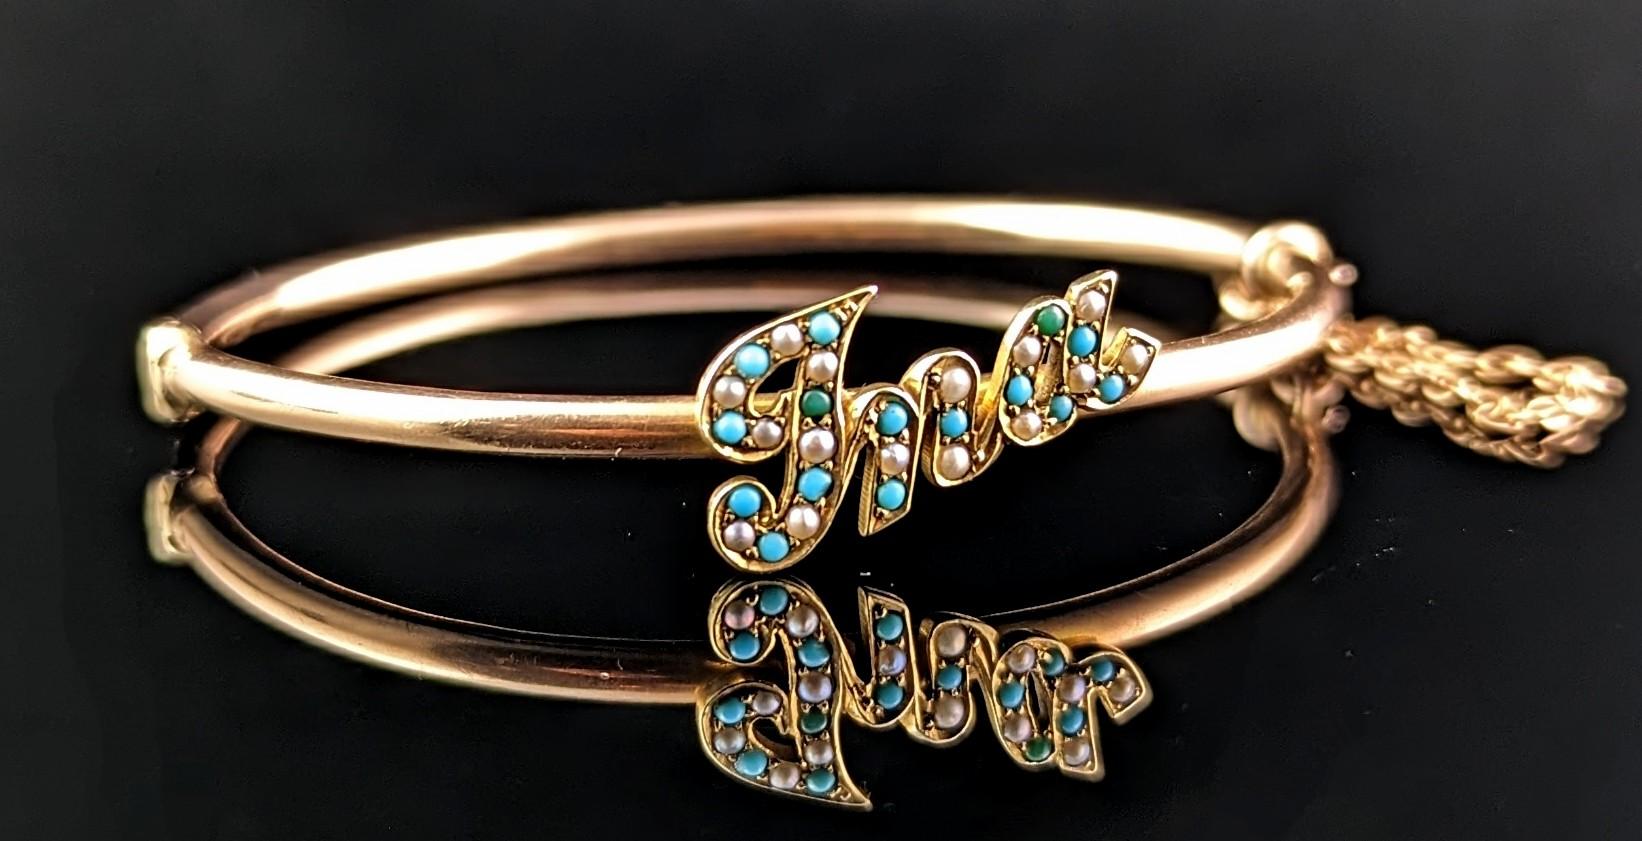 This antique 15ct gold name bangle is certainly unique and beautiful too!

It is a smaller sized bangle, possibly made for a child, a gorgeous example of an identity bracelet for a beloved daughter or granddaughter perhaps.

It has a slender and